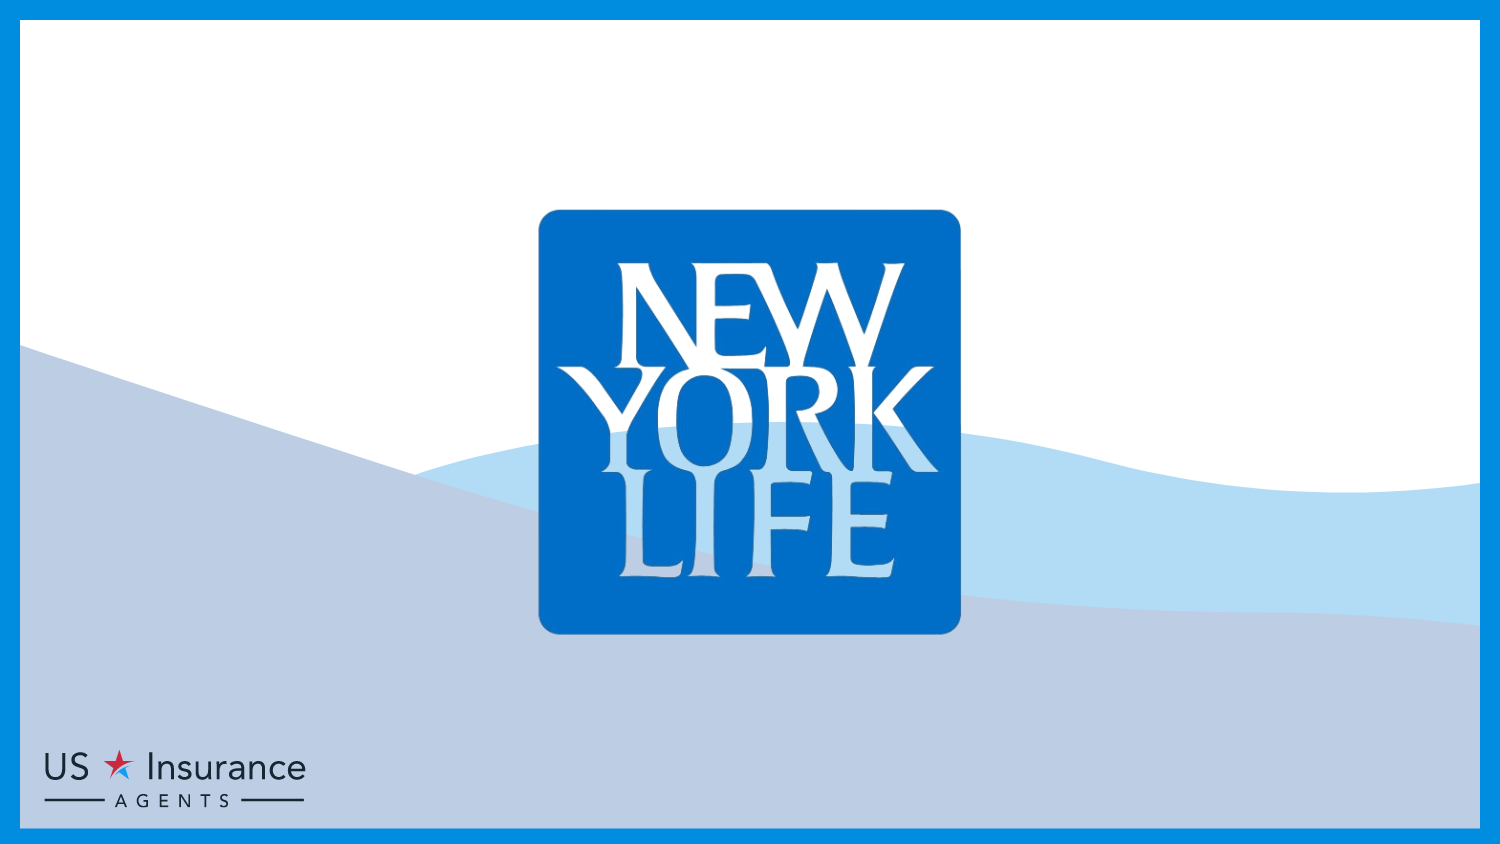 New York Life: Best Life Insurance for Missionaries